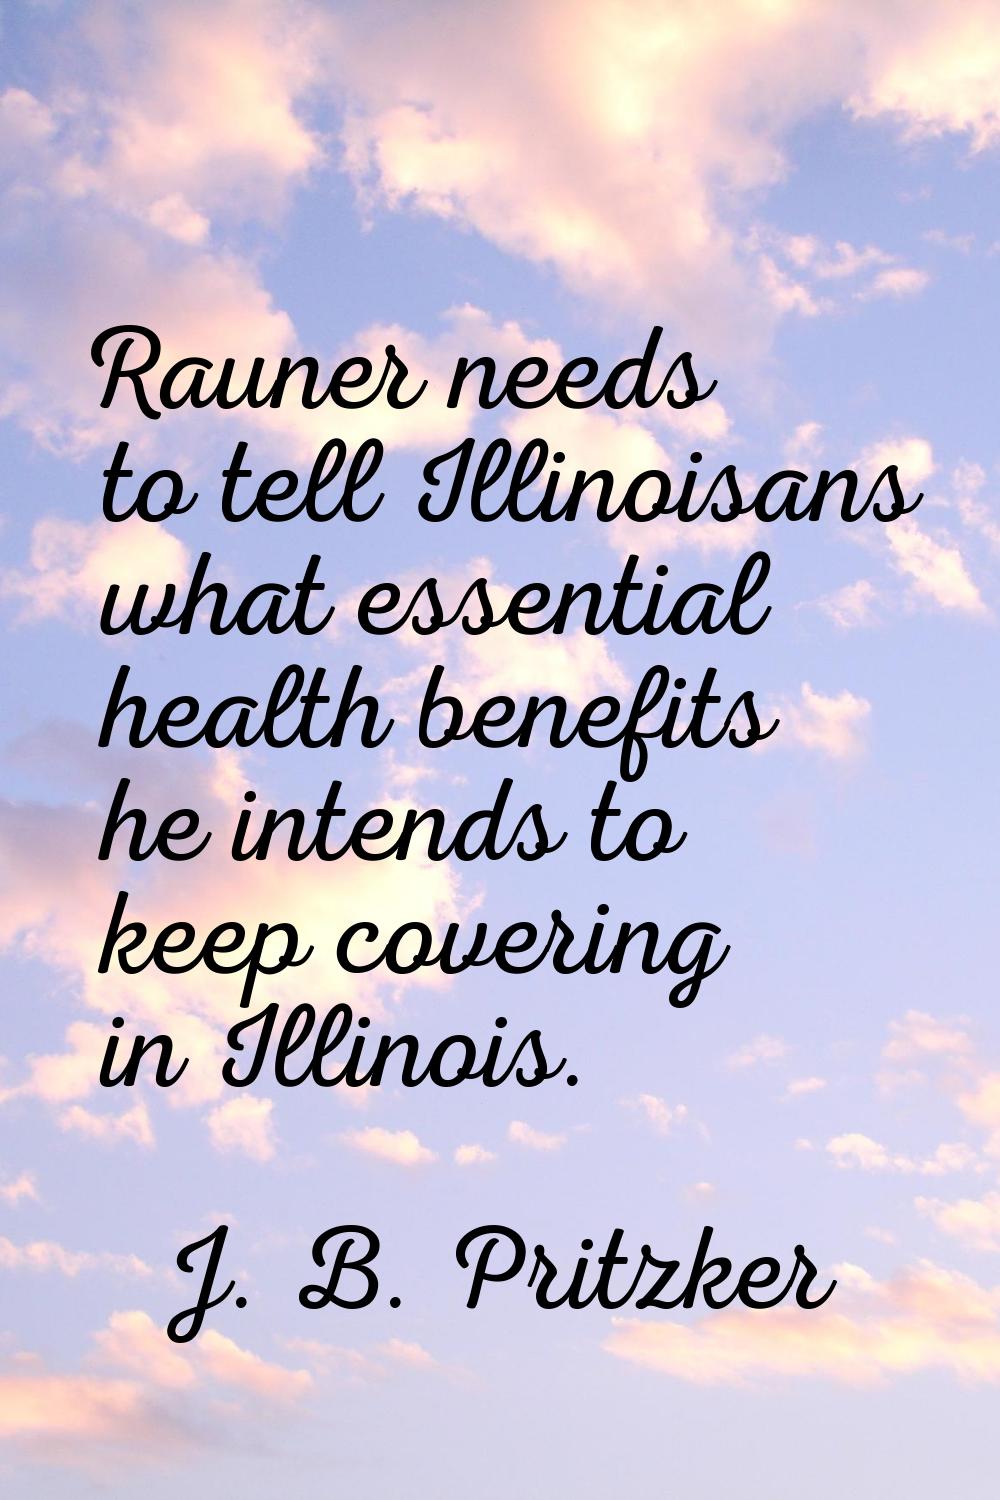 Rauner needs to tell Illinoisans what essential health benefits he intends to keep covering in Illi